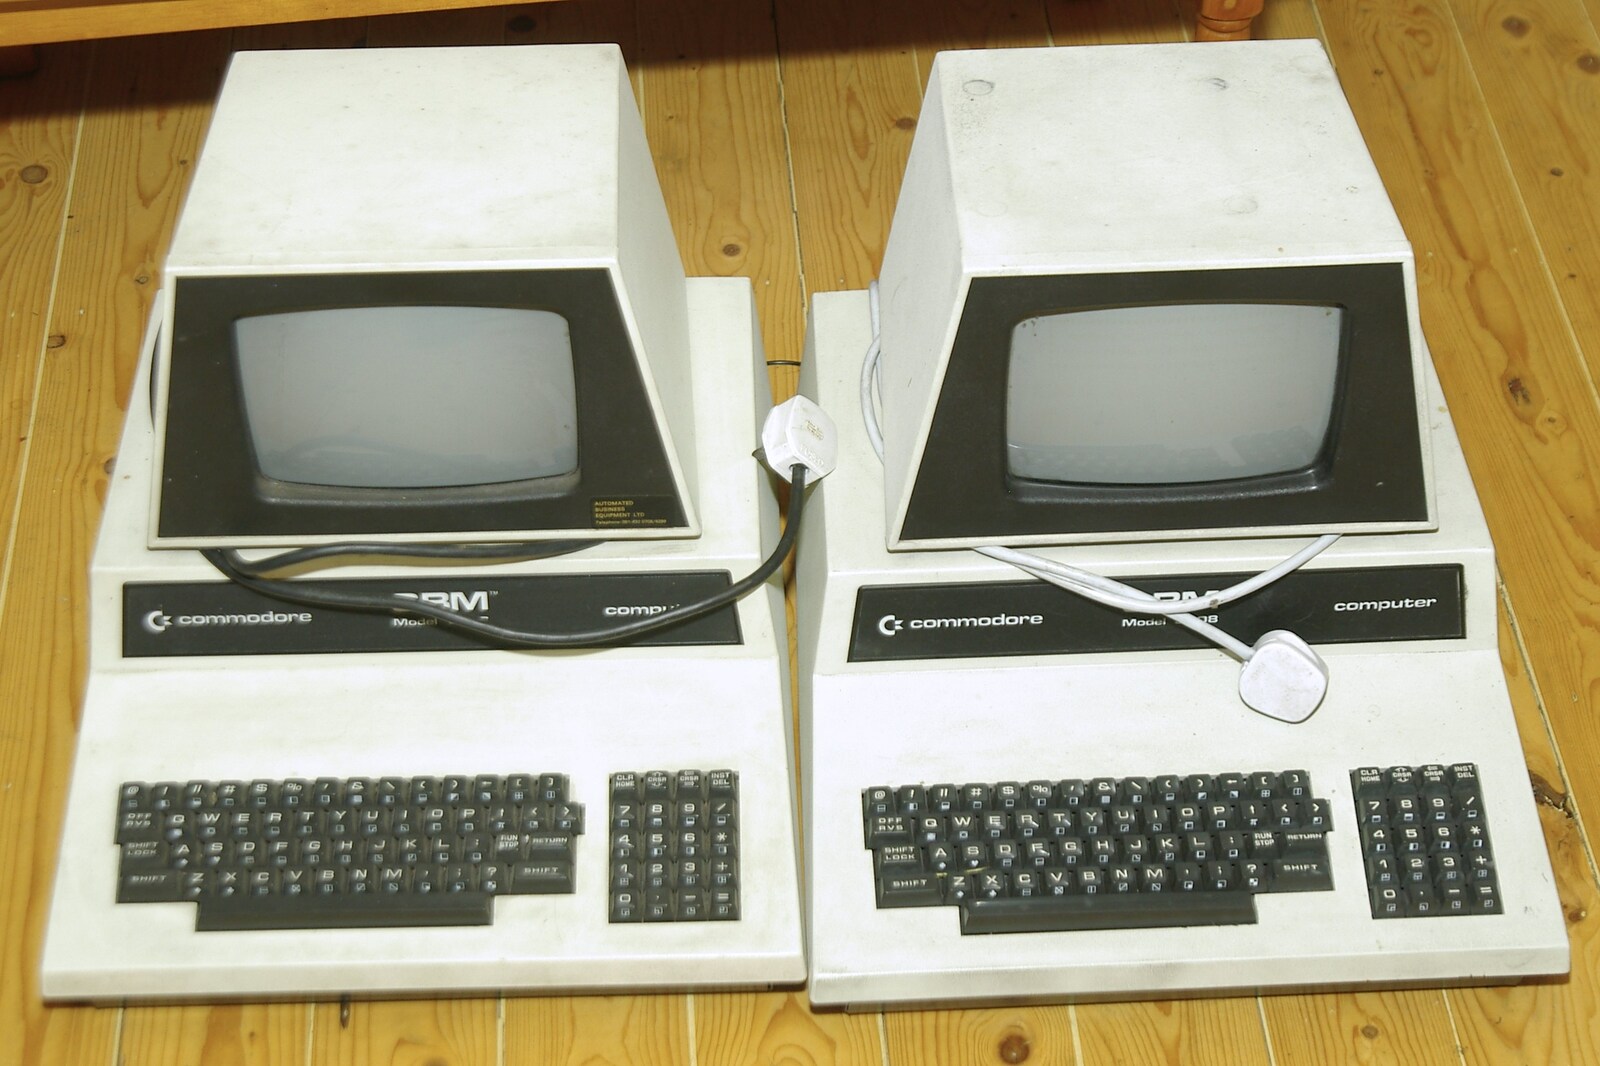 A pair of Commodore PETs from Wrecked Cars, A Night Out and Stick Game in the Cherry Tree, Cambridge and Yaxley, Suffolk- 24th February 2006